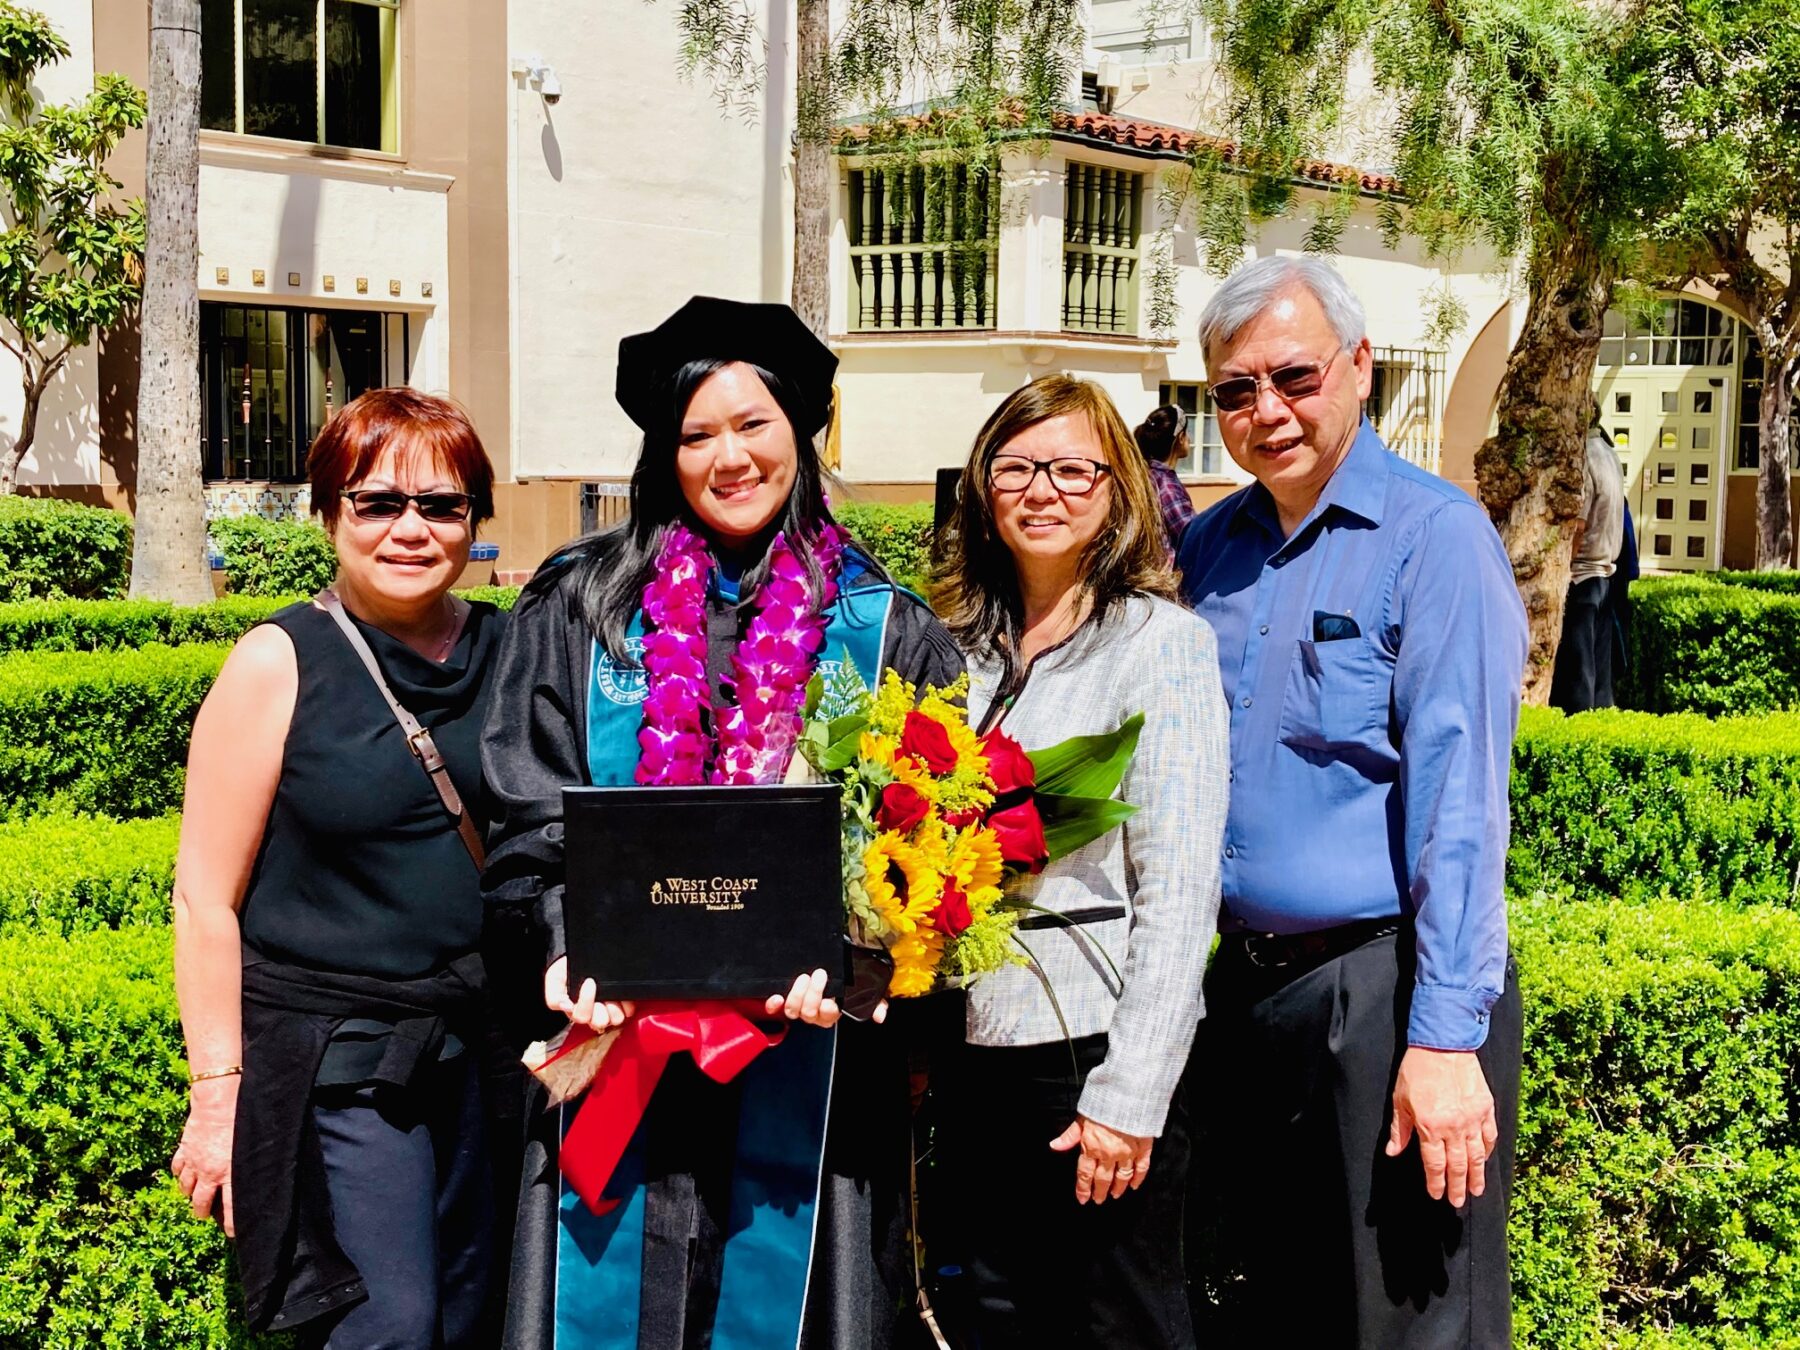 Melysa Q. with her family on graduation day.